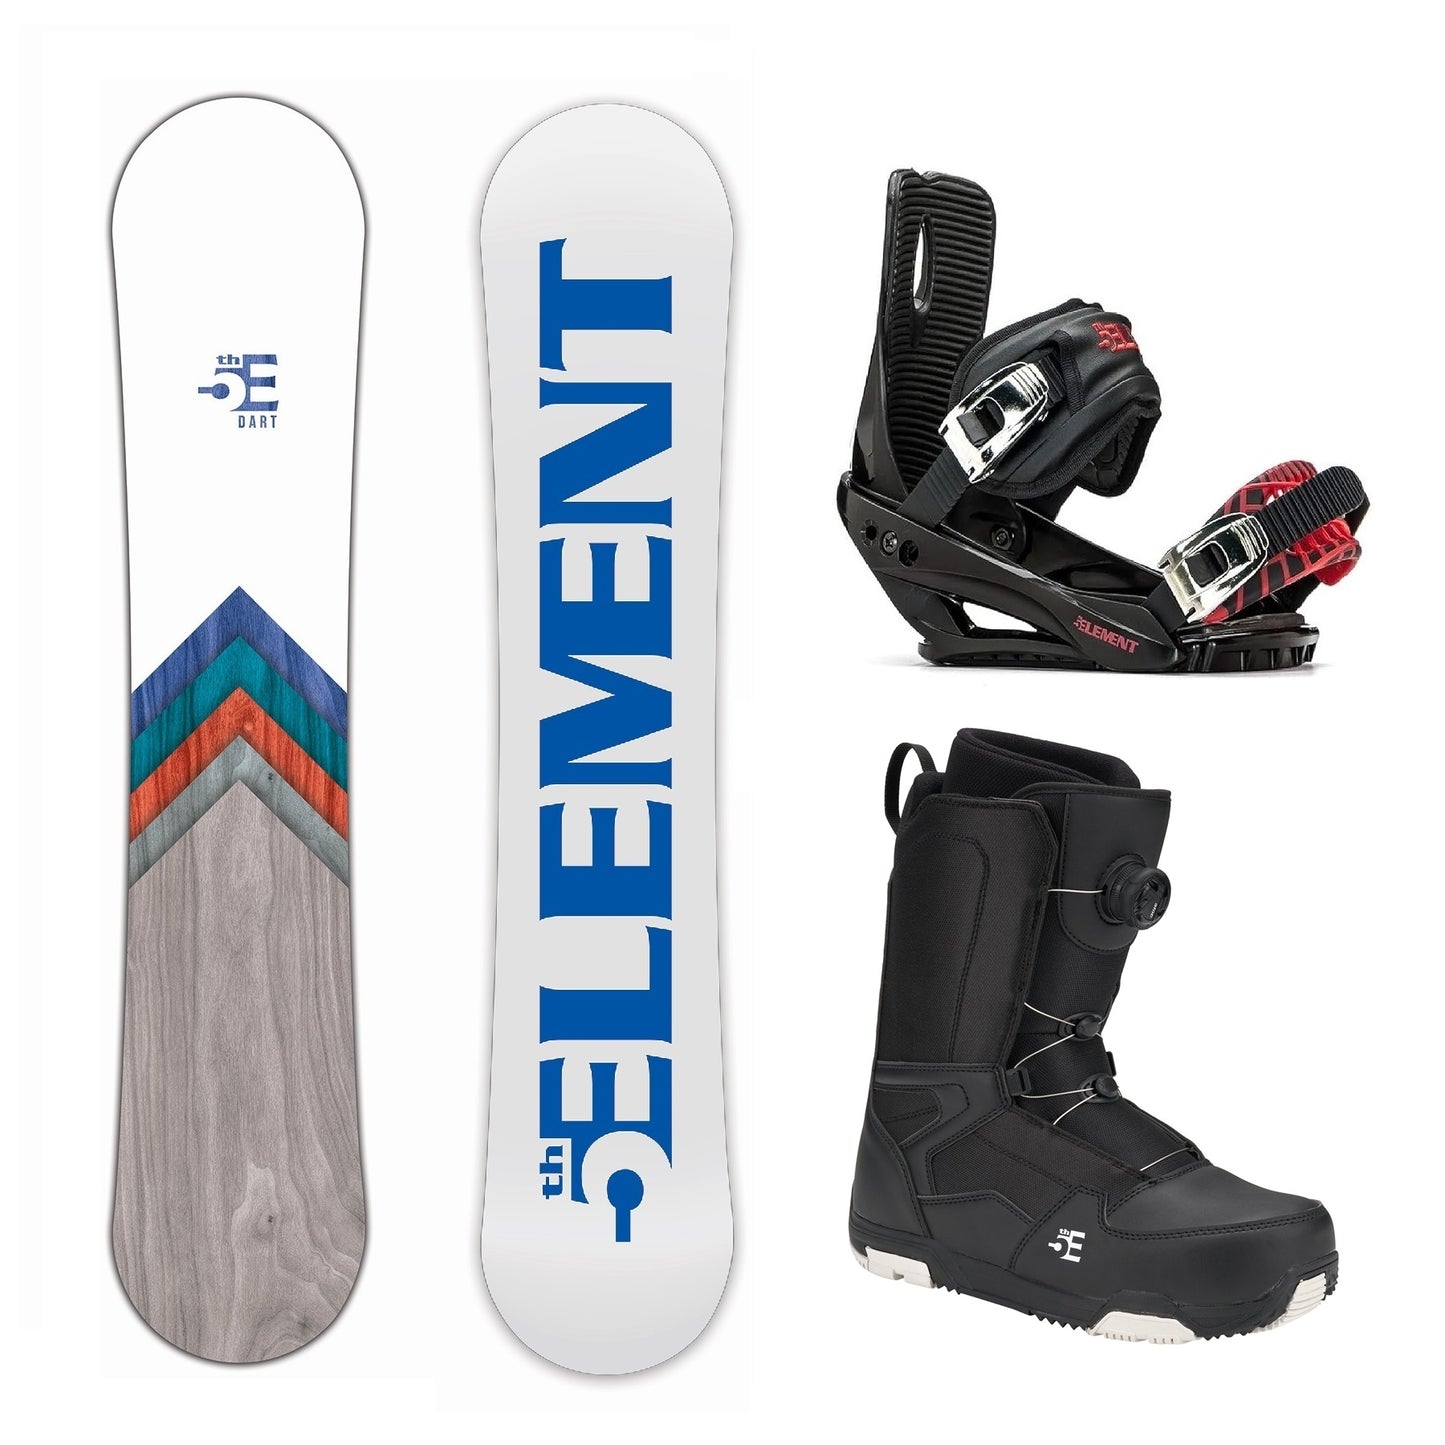 5th Element Dart ATOP Complete Snowboard Package - Black/Red Black